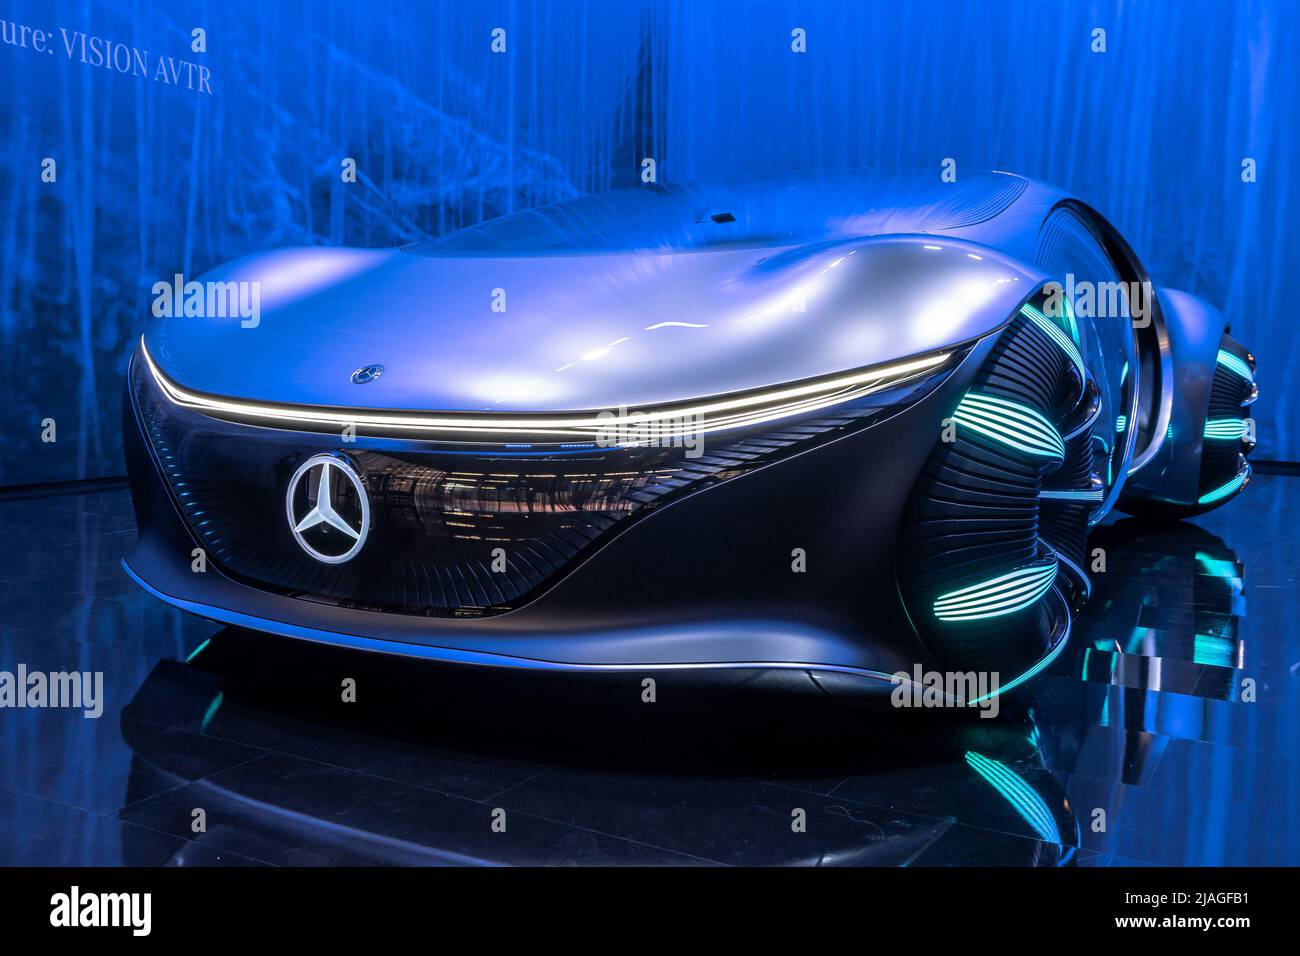 Mercedes-Benz Vision AVTR intuitive smart concept car, reading your mind while driving, showcased at the IAA Mobility 2021 motor show in Munich, Germa Stock Photo